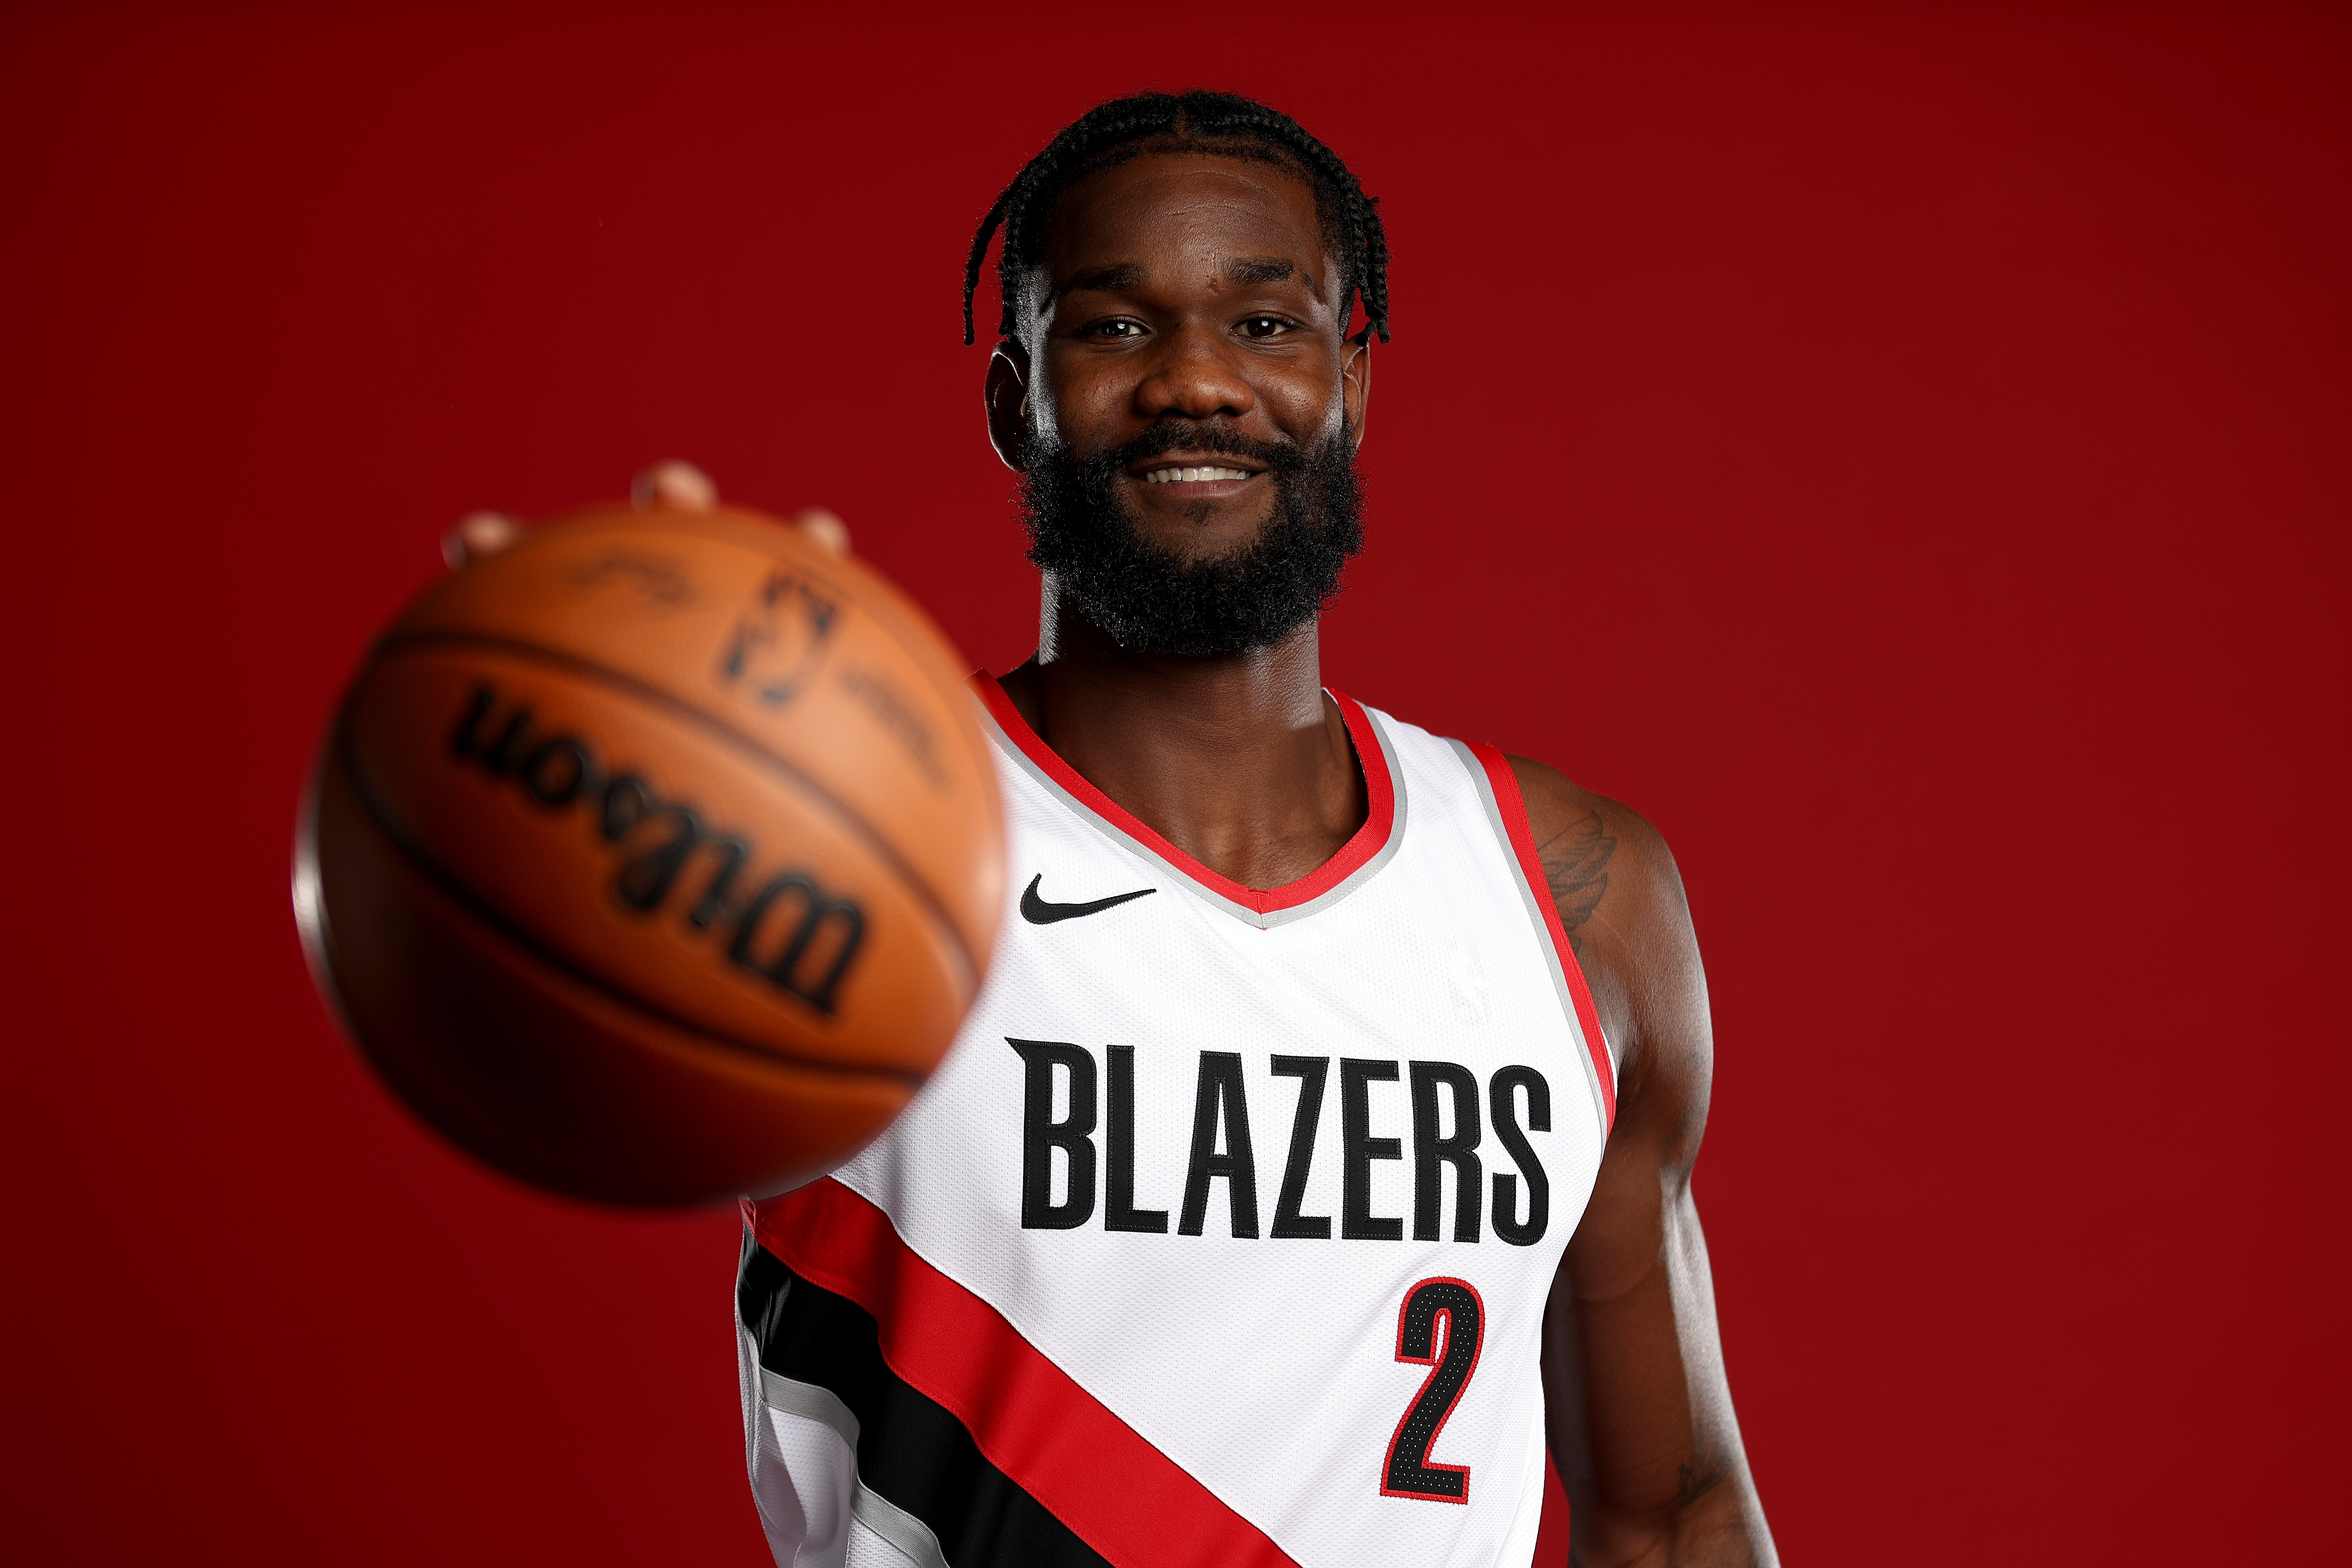 New Hibachi': Former NBA Legend Gives Away His Title to Blazers